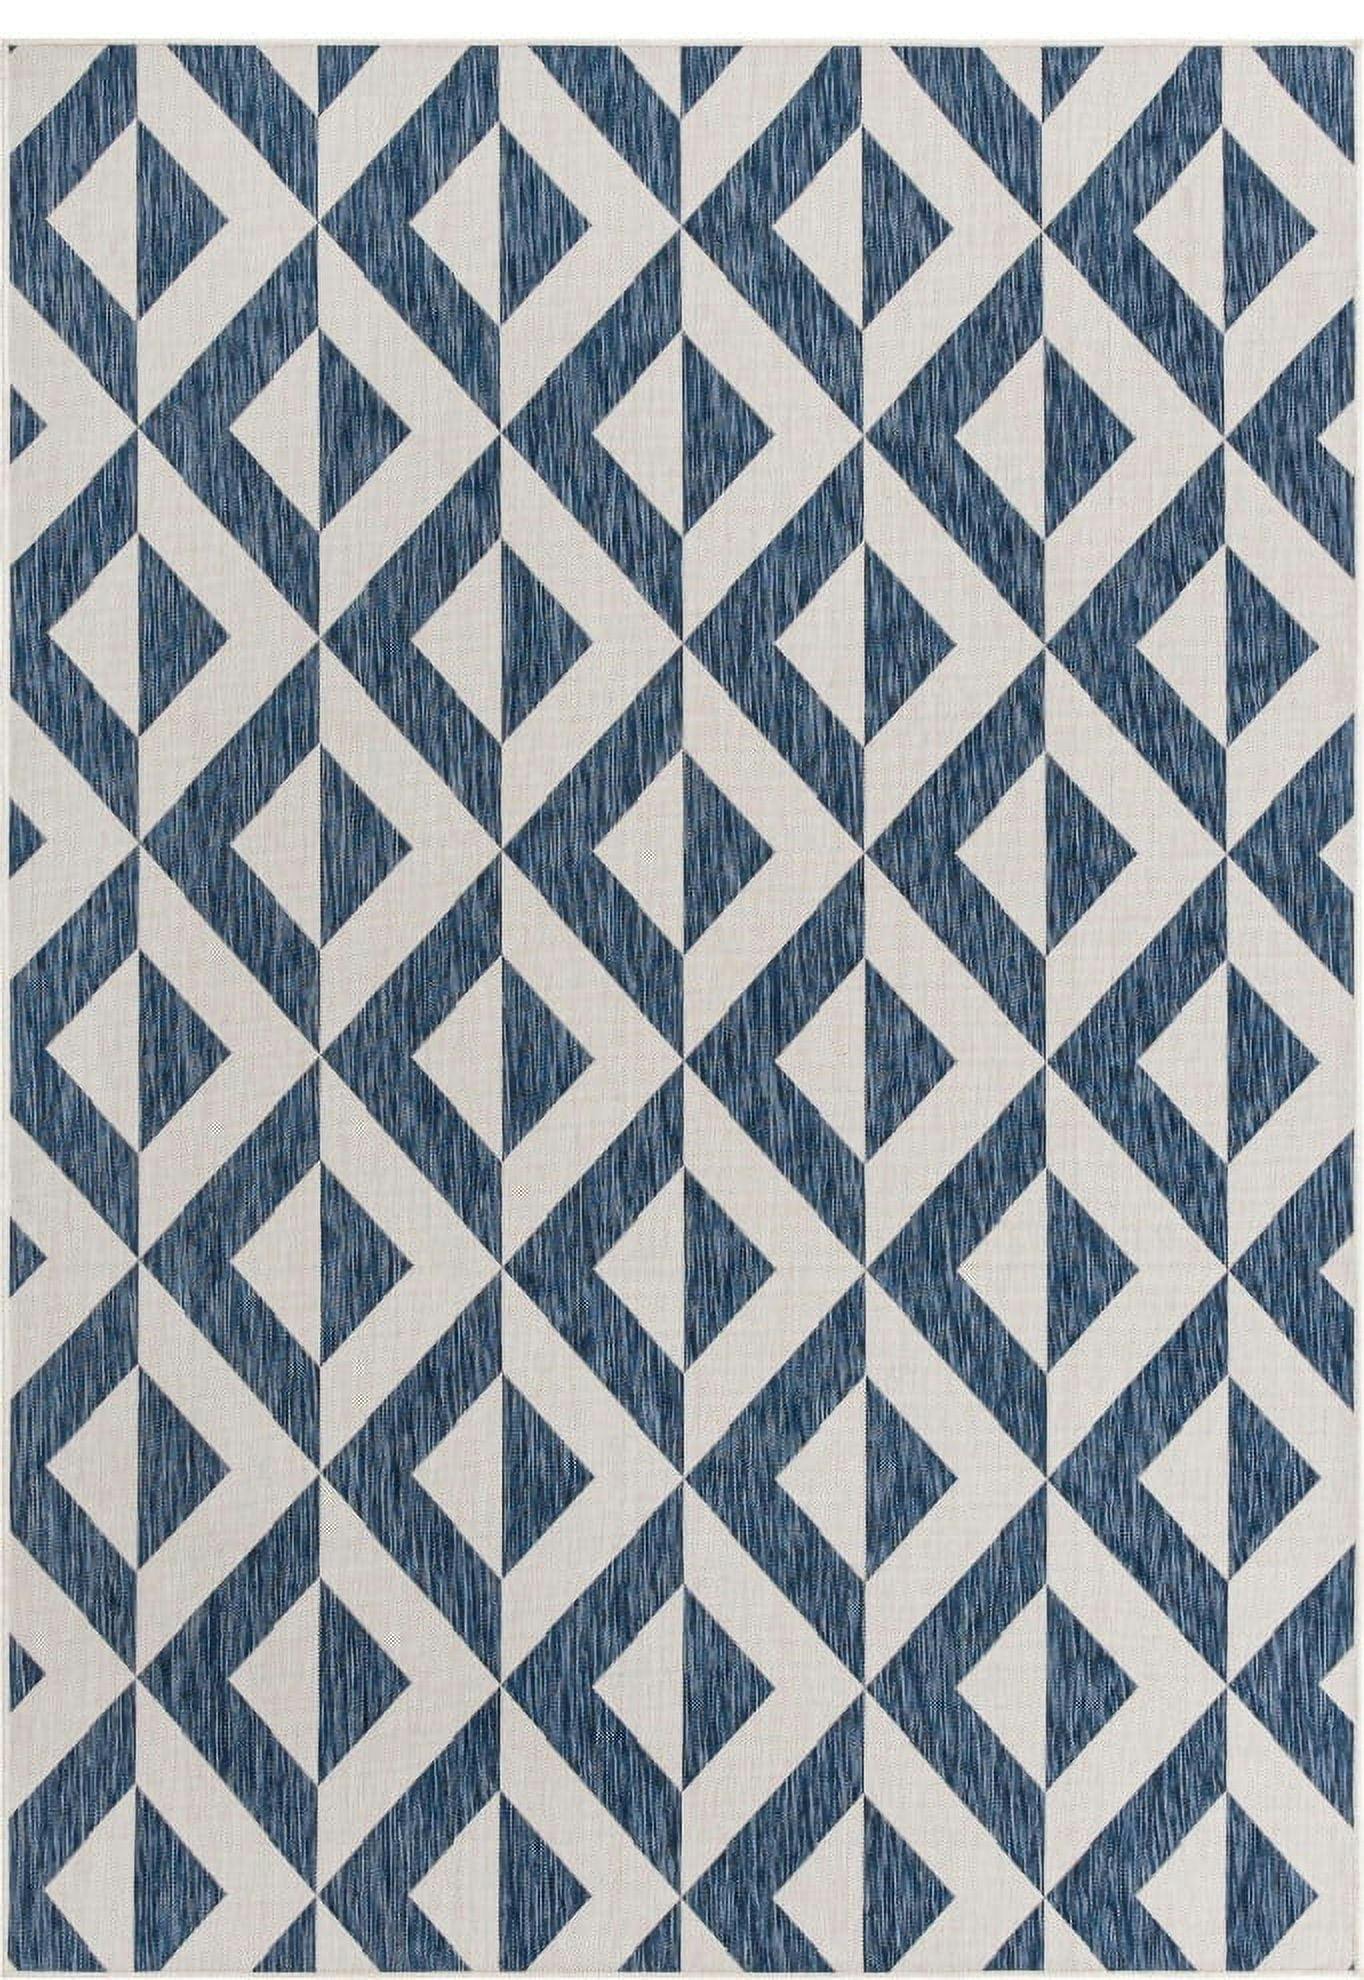 Reversible Geometric Blue Synthetic Outdoor Rug 7'1" x 10'